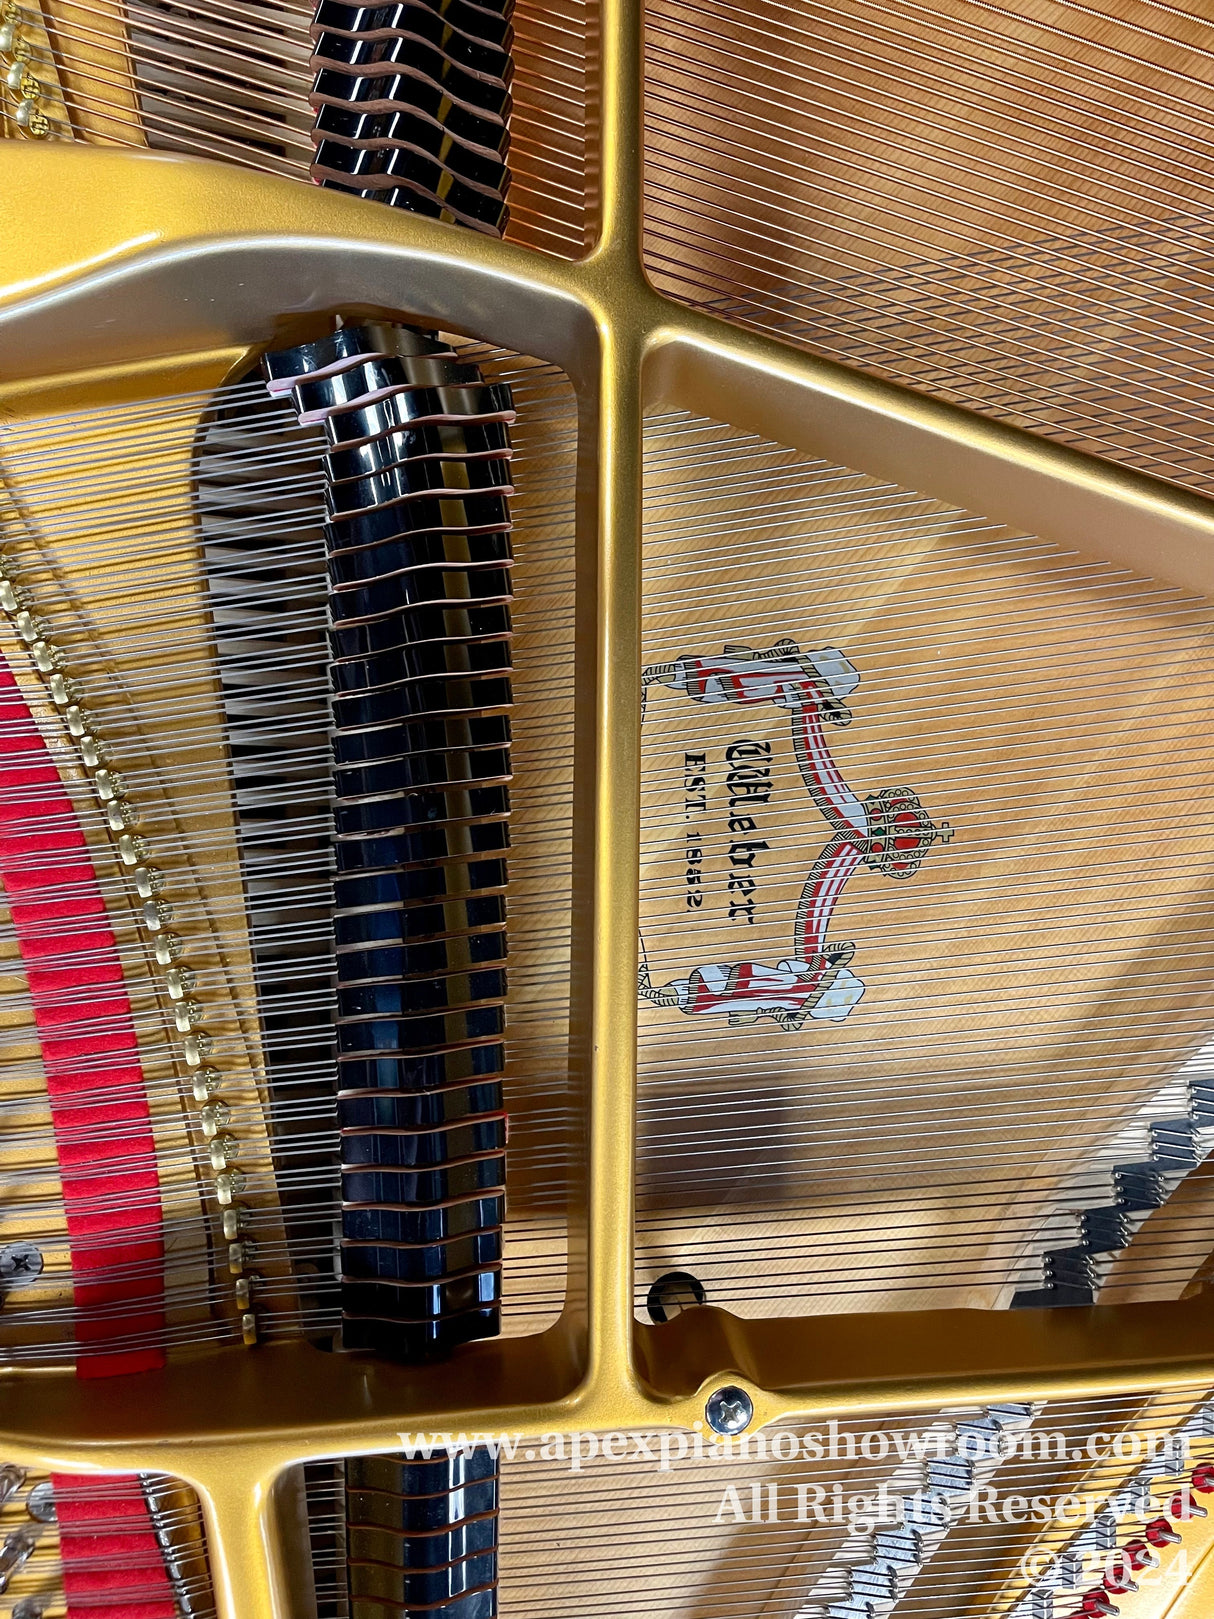 Interior view of a grand piano showing the strings and the cast iron frame, with a focus on the gold-painted harp and a decal stating the brand on the soundboard.